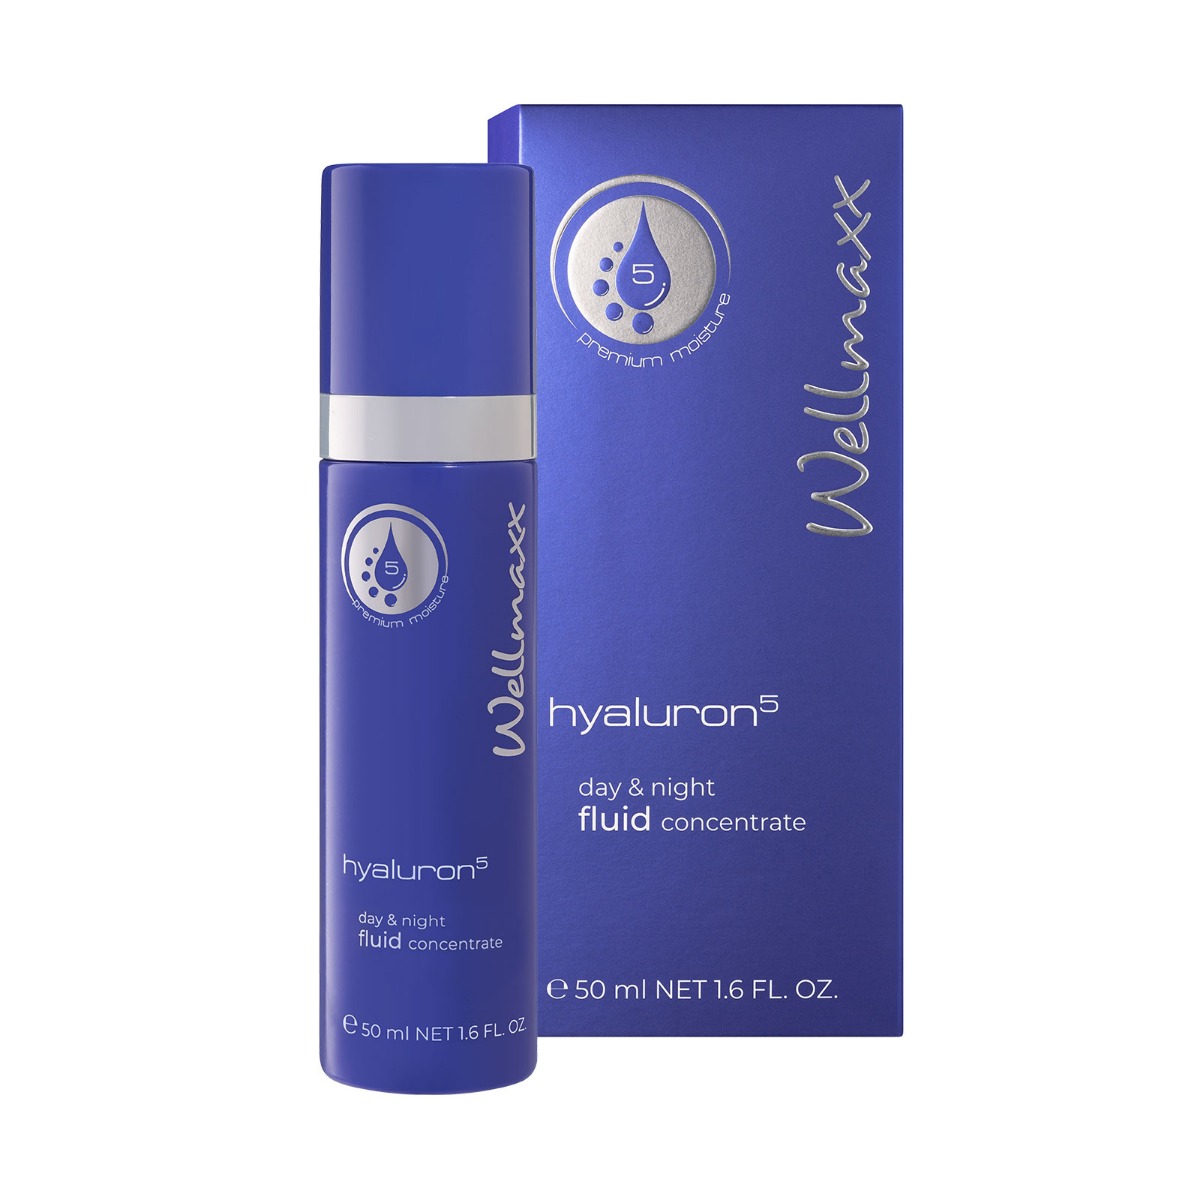 hyaluron⁵ day & night fluid concentrate